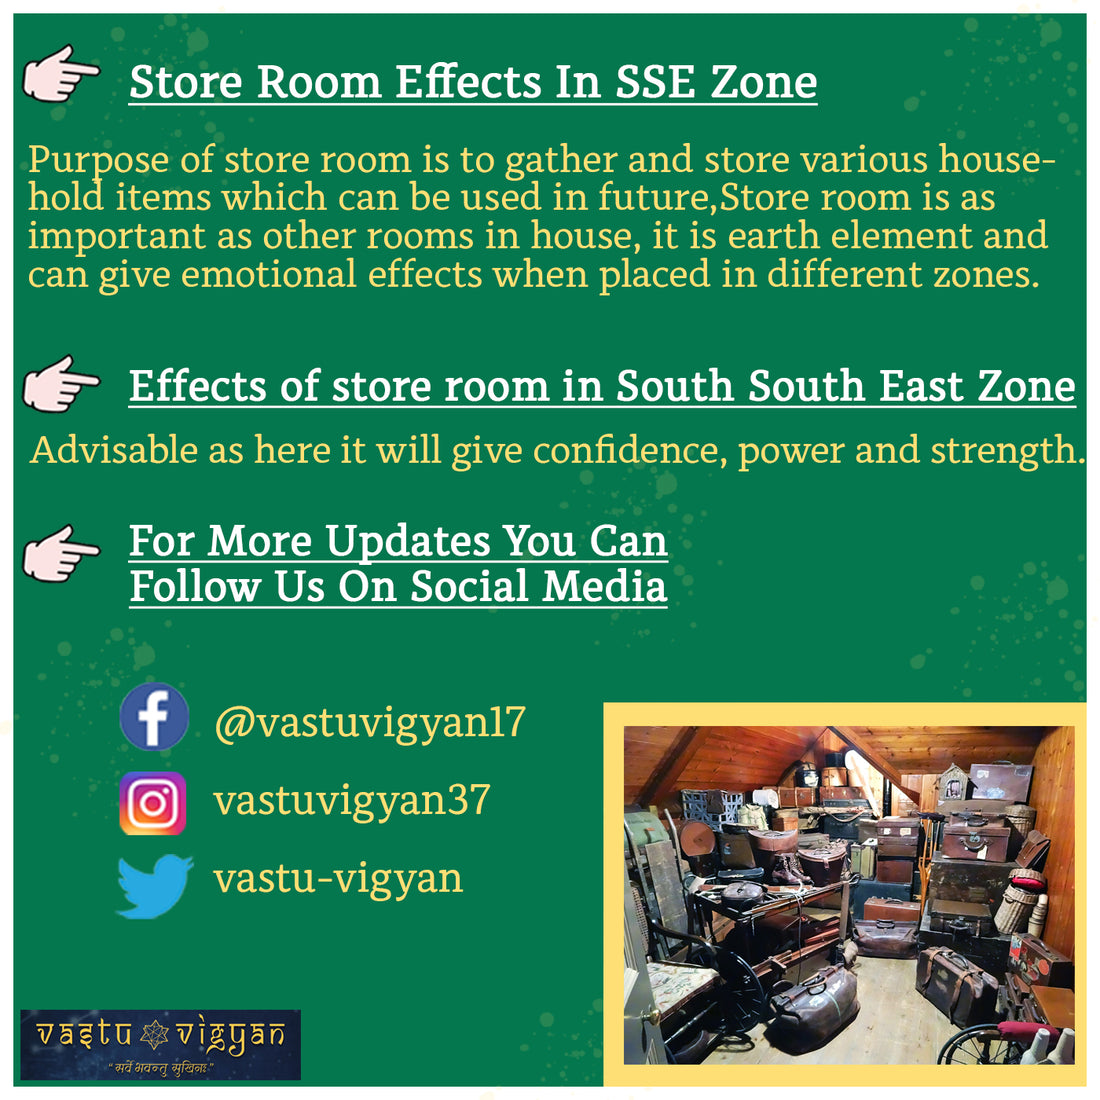 Store Room Effects in South South East Zone